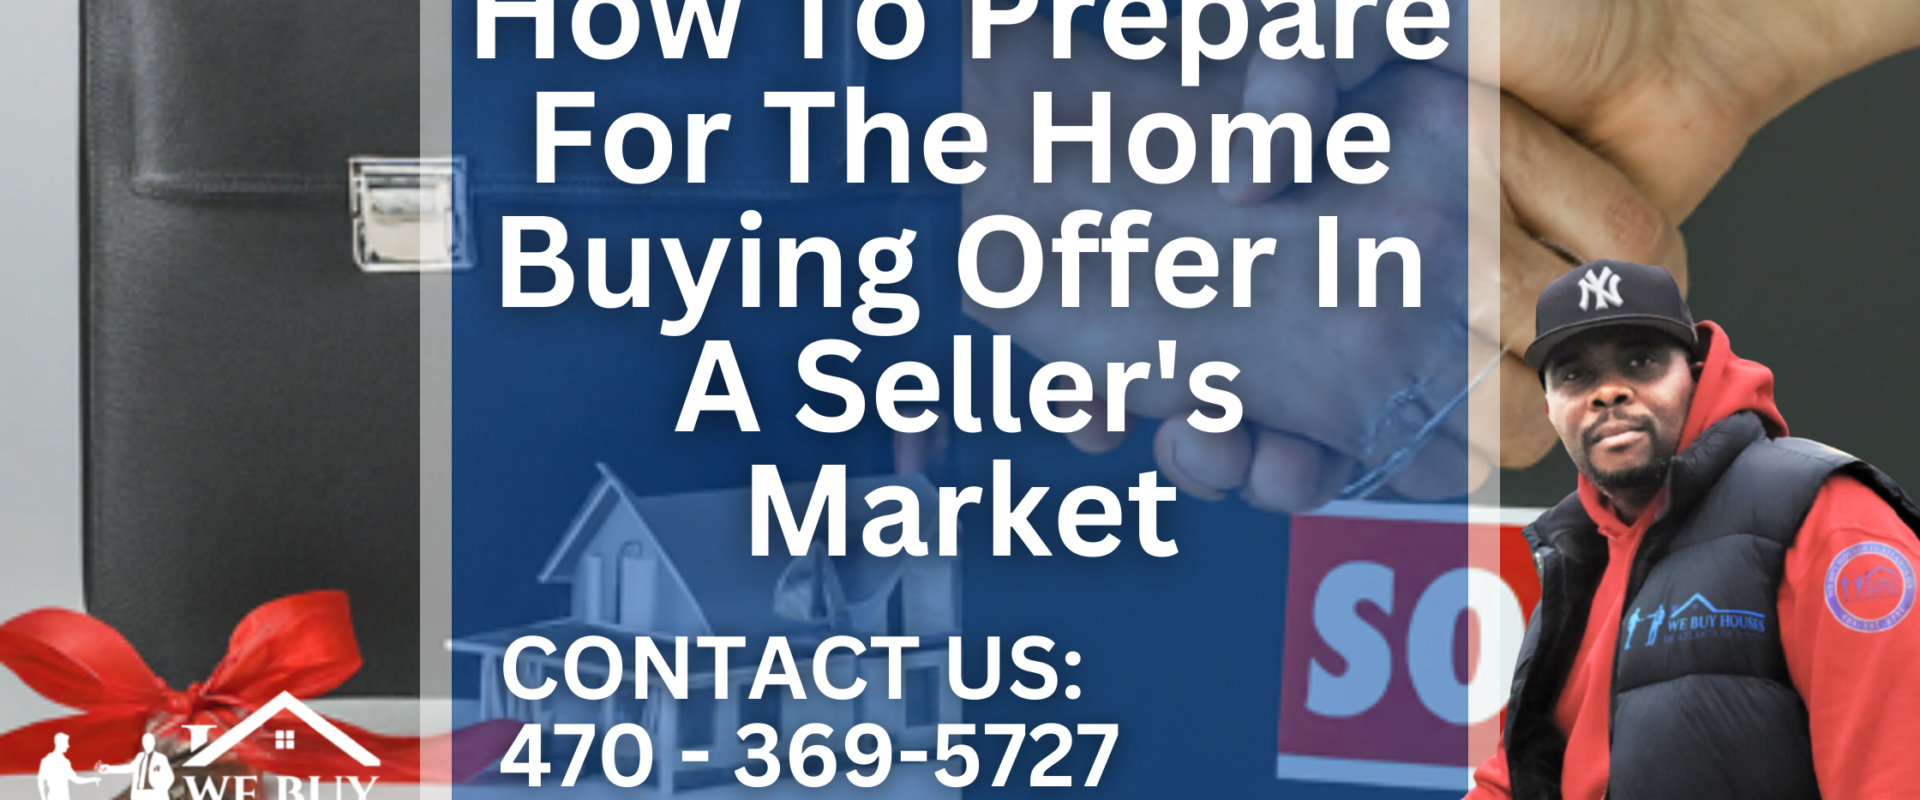 How To Prepare For The Home Buying Offer In A Seller's Market